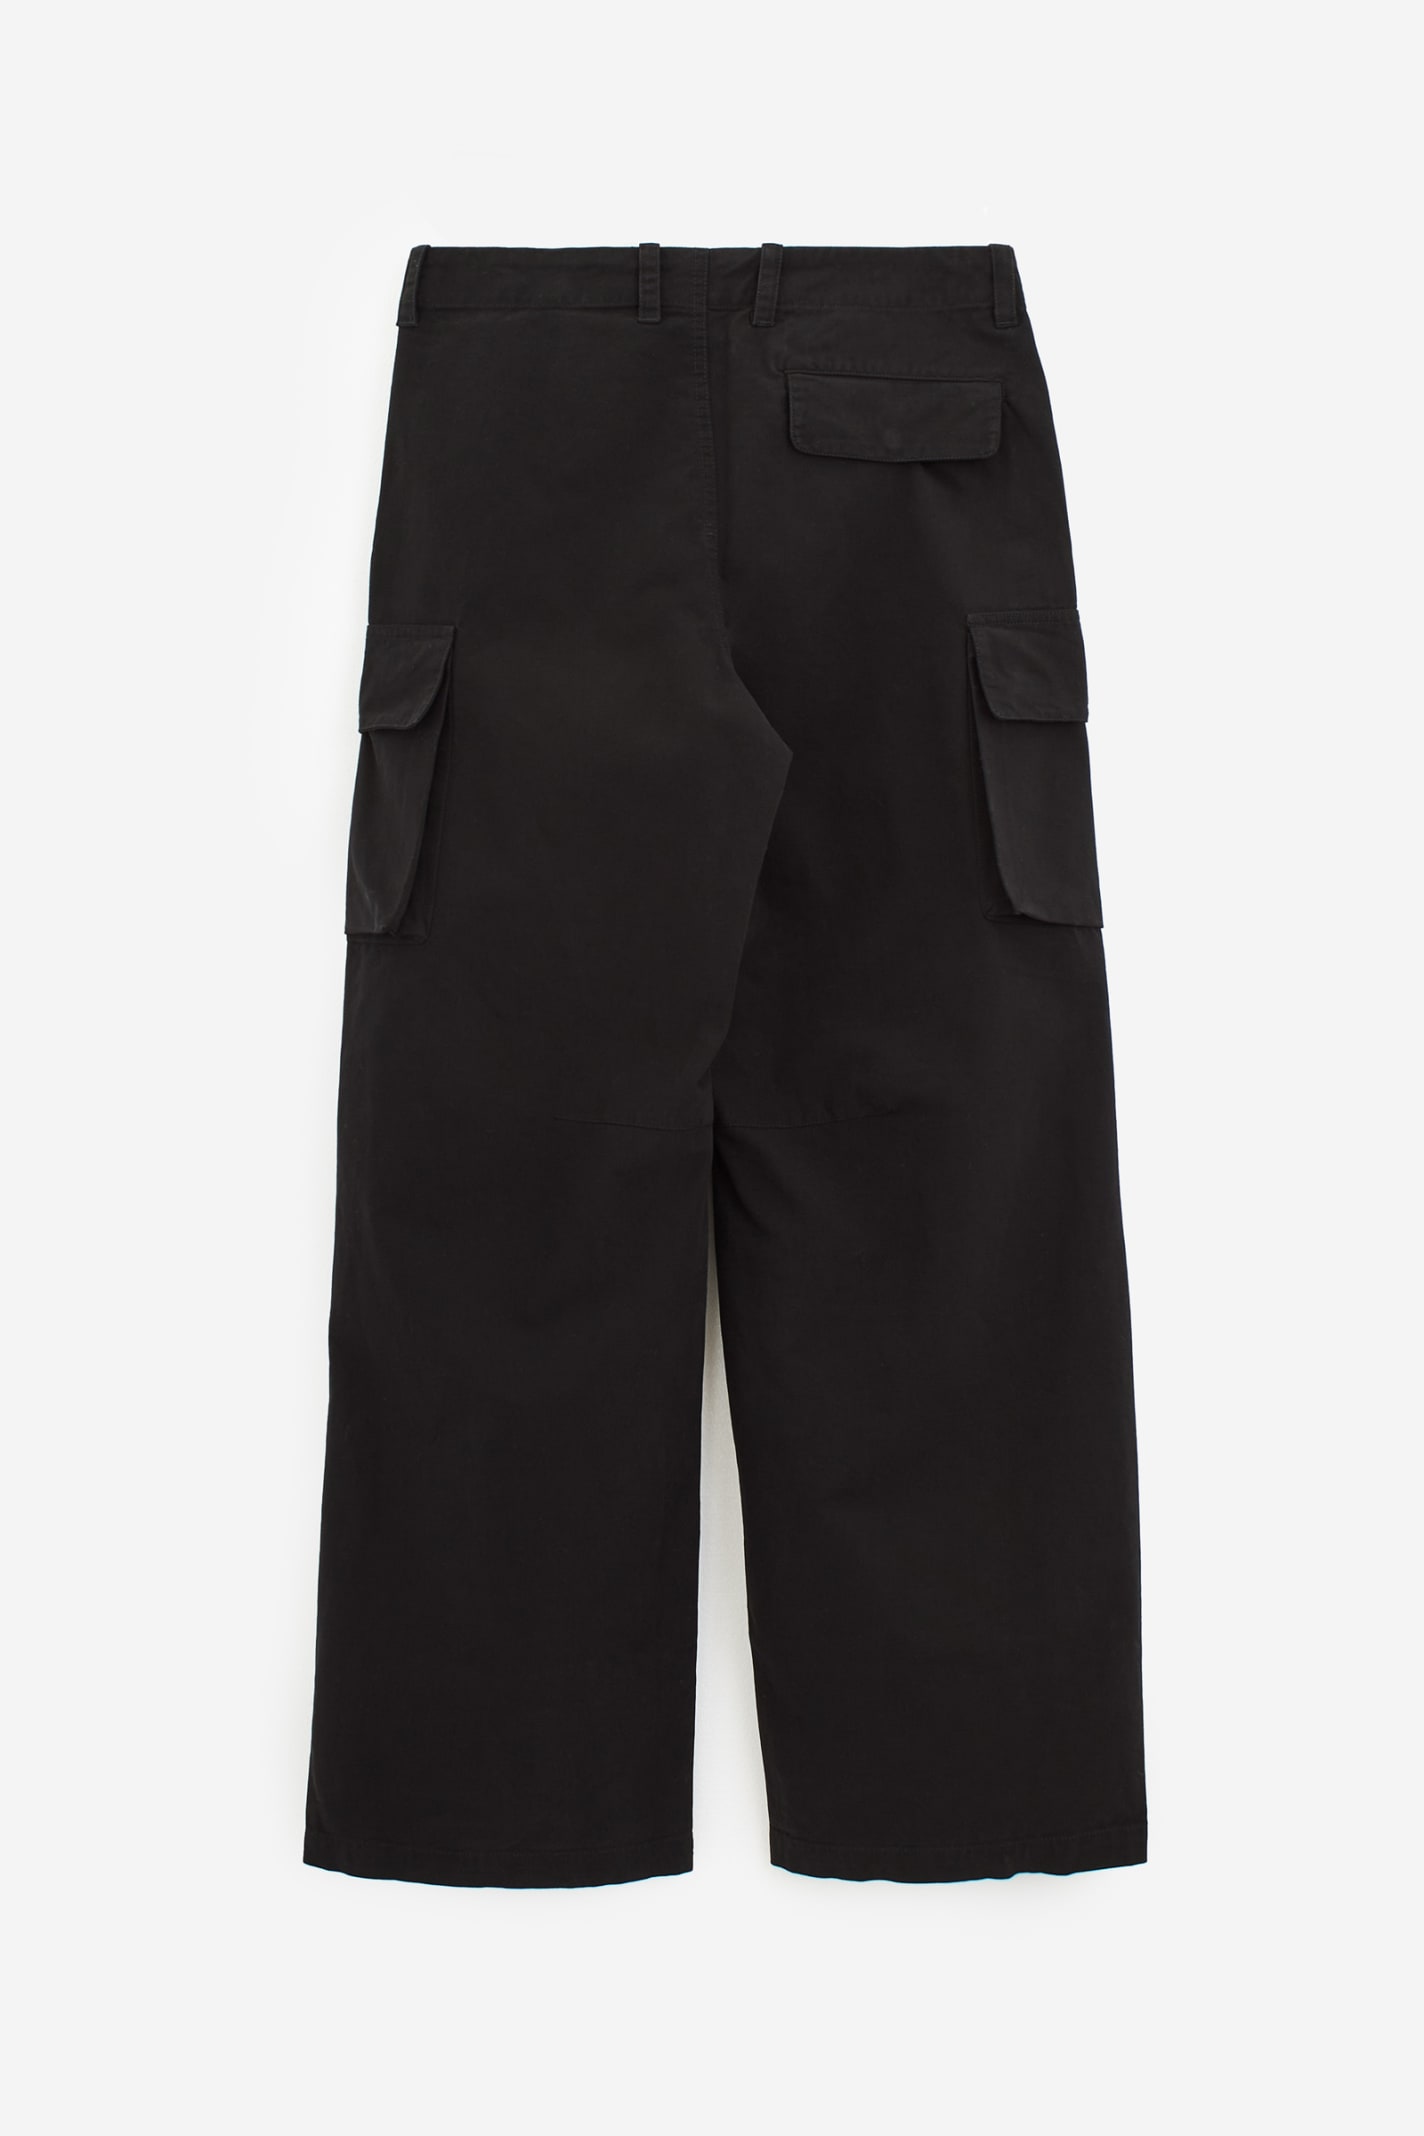 Shop Our Legacy Mount Cargo Pants In Black